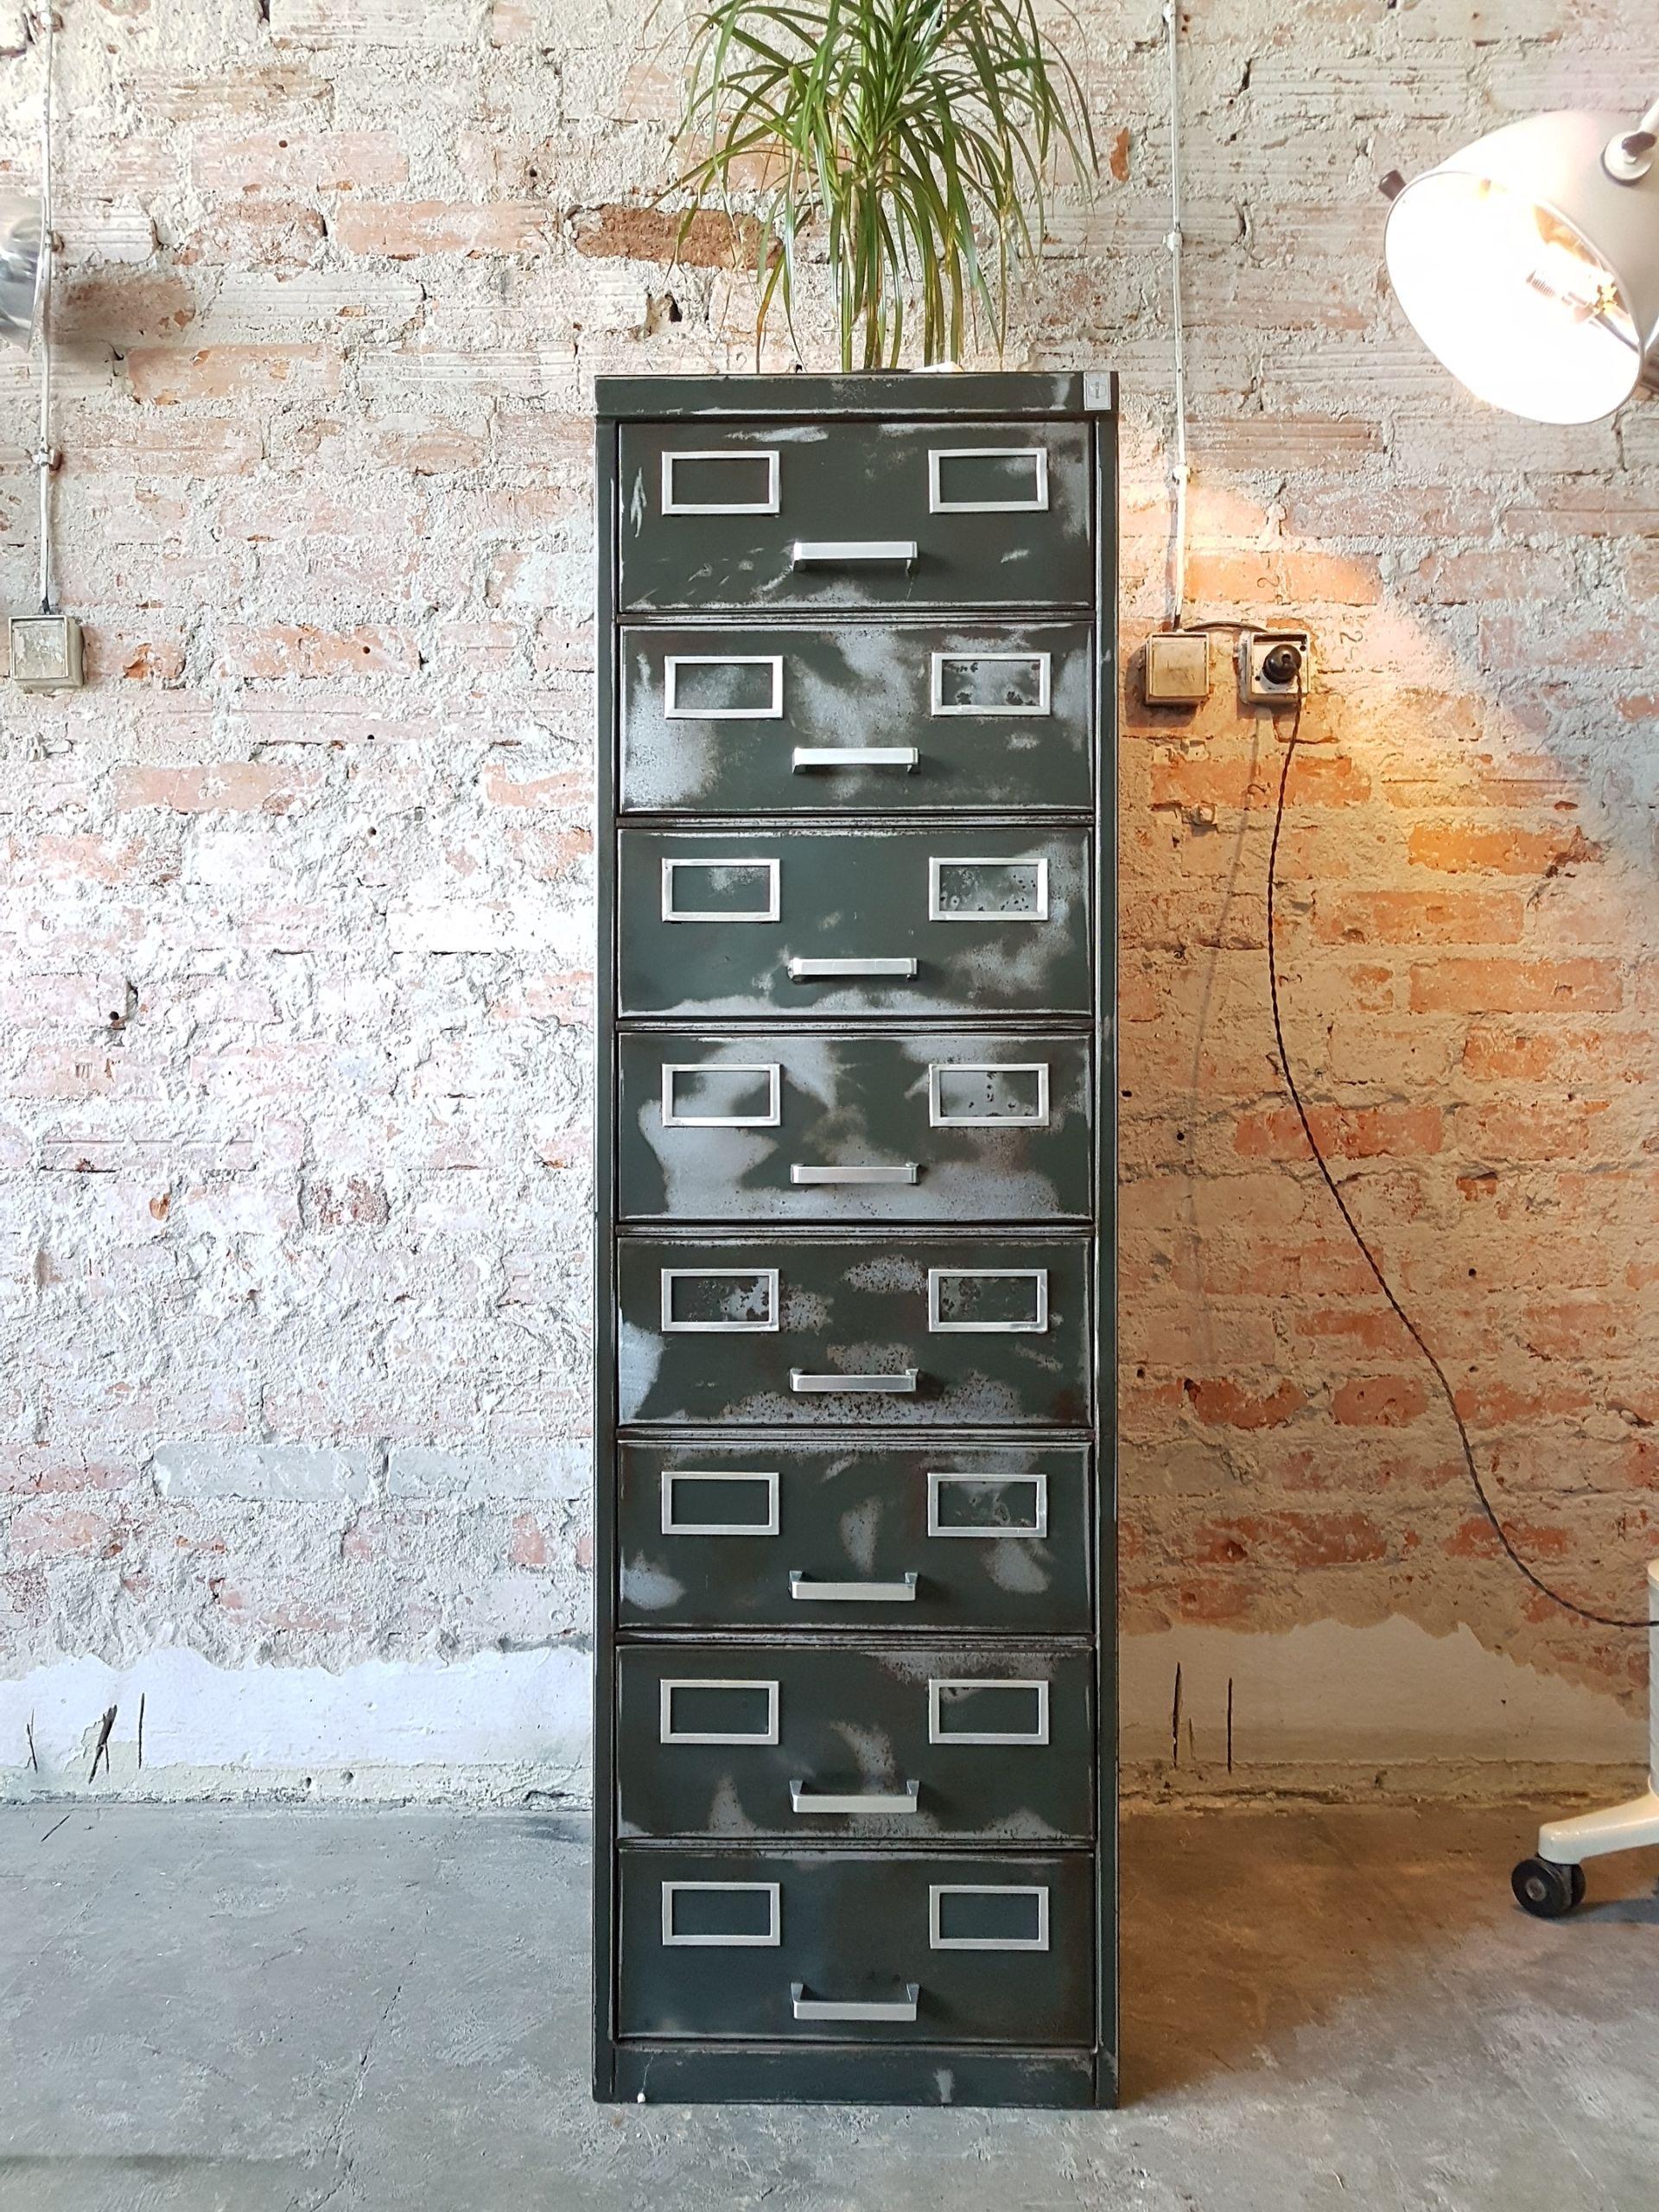 This wonderful file cabinet has been customized in Mag Haus workshop with a stripped, polished, raw steel patina sealed with a gloss lacquer finish. The original green and polished metal is beautifully complimented by the polished original aluminium